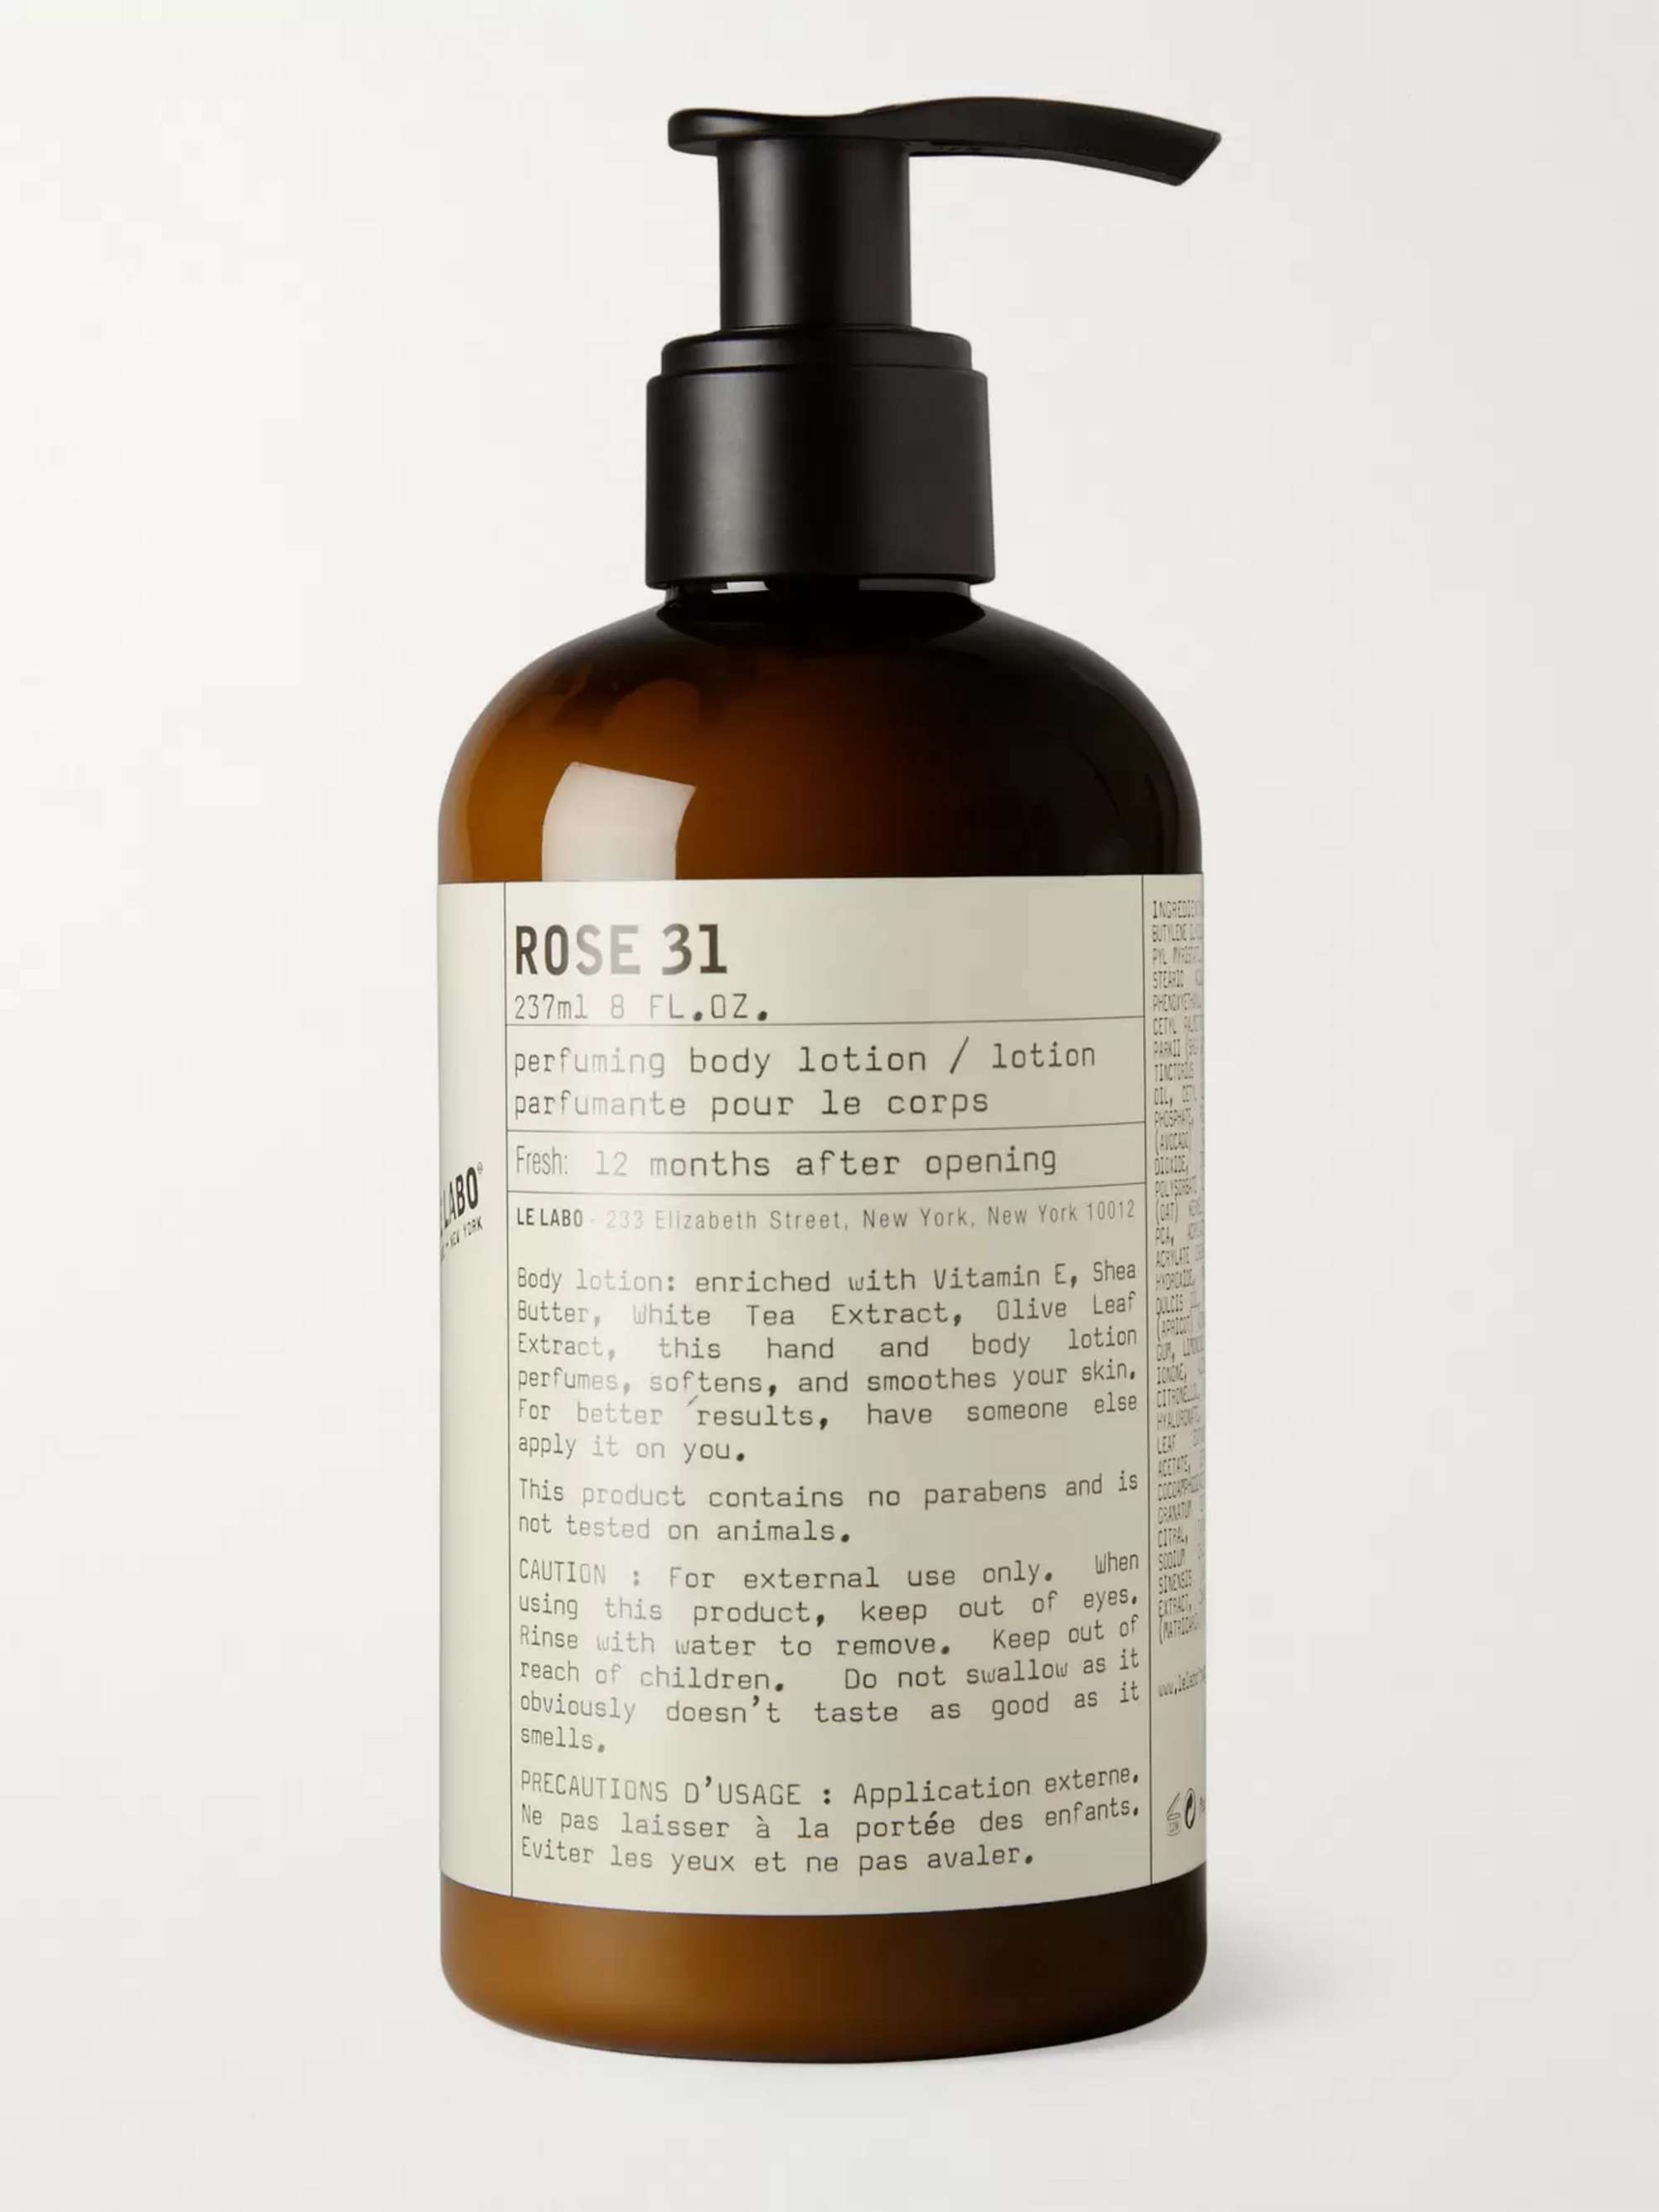 Colorless Body Lotion - Rose 31, 237ml | LE LABO | MR PORTER